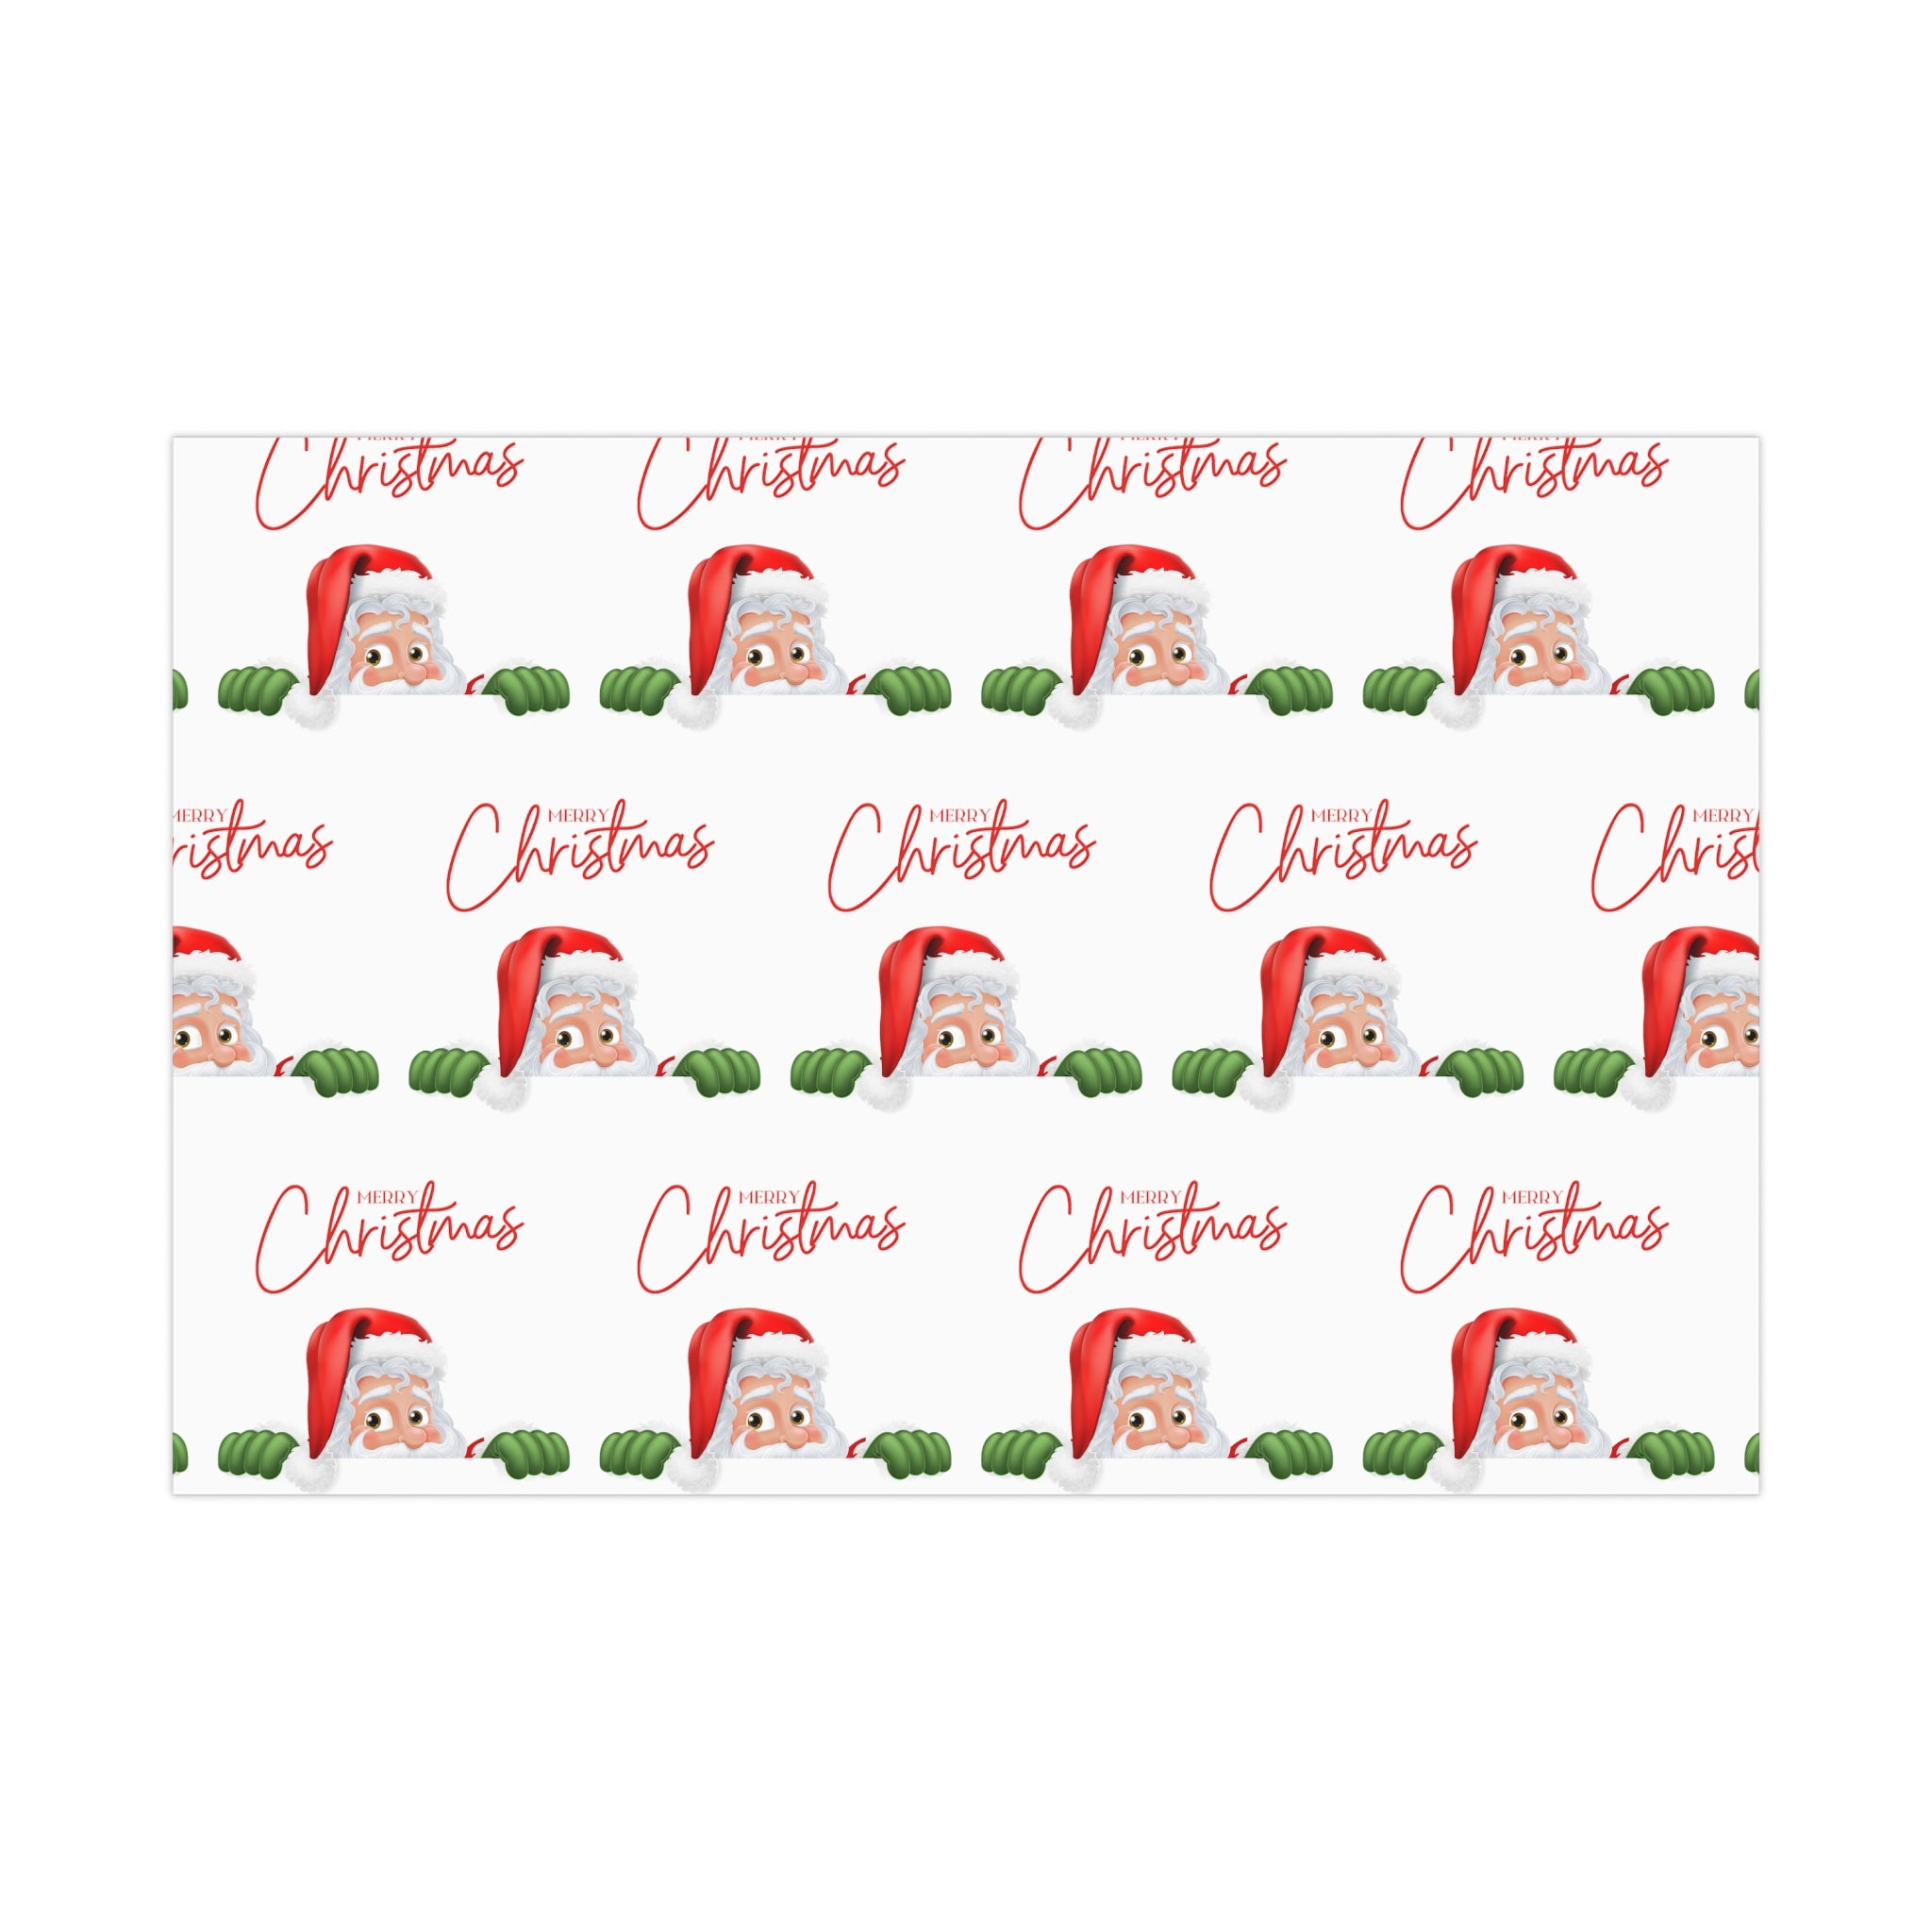 MERRY CHRISTMAS WRAPPING PAPER